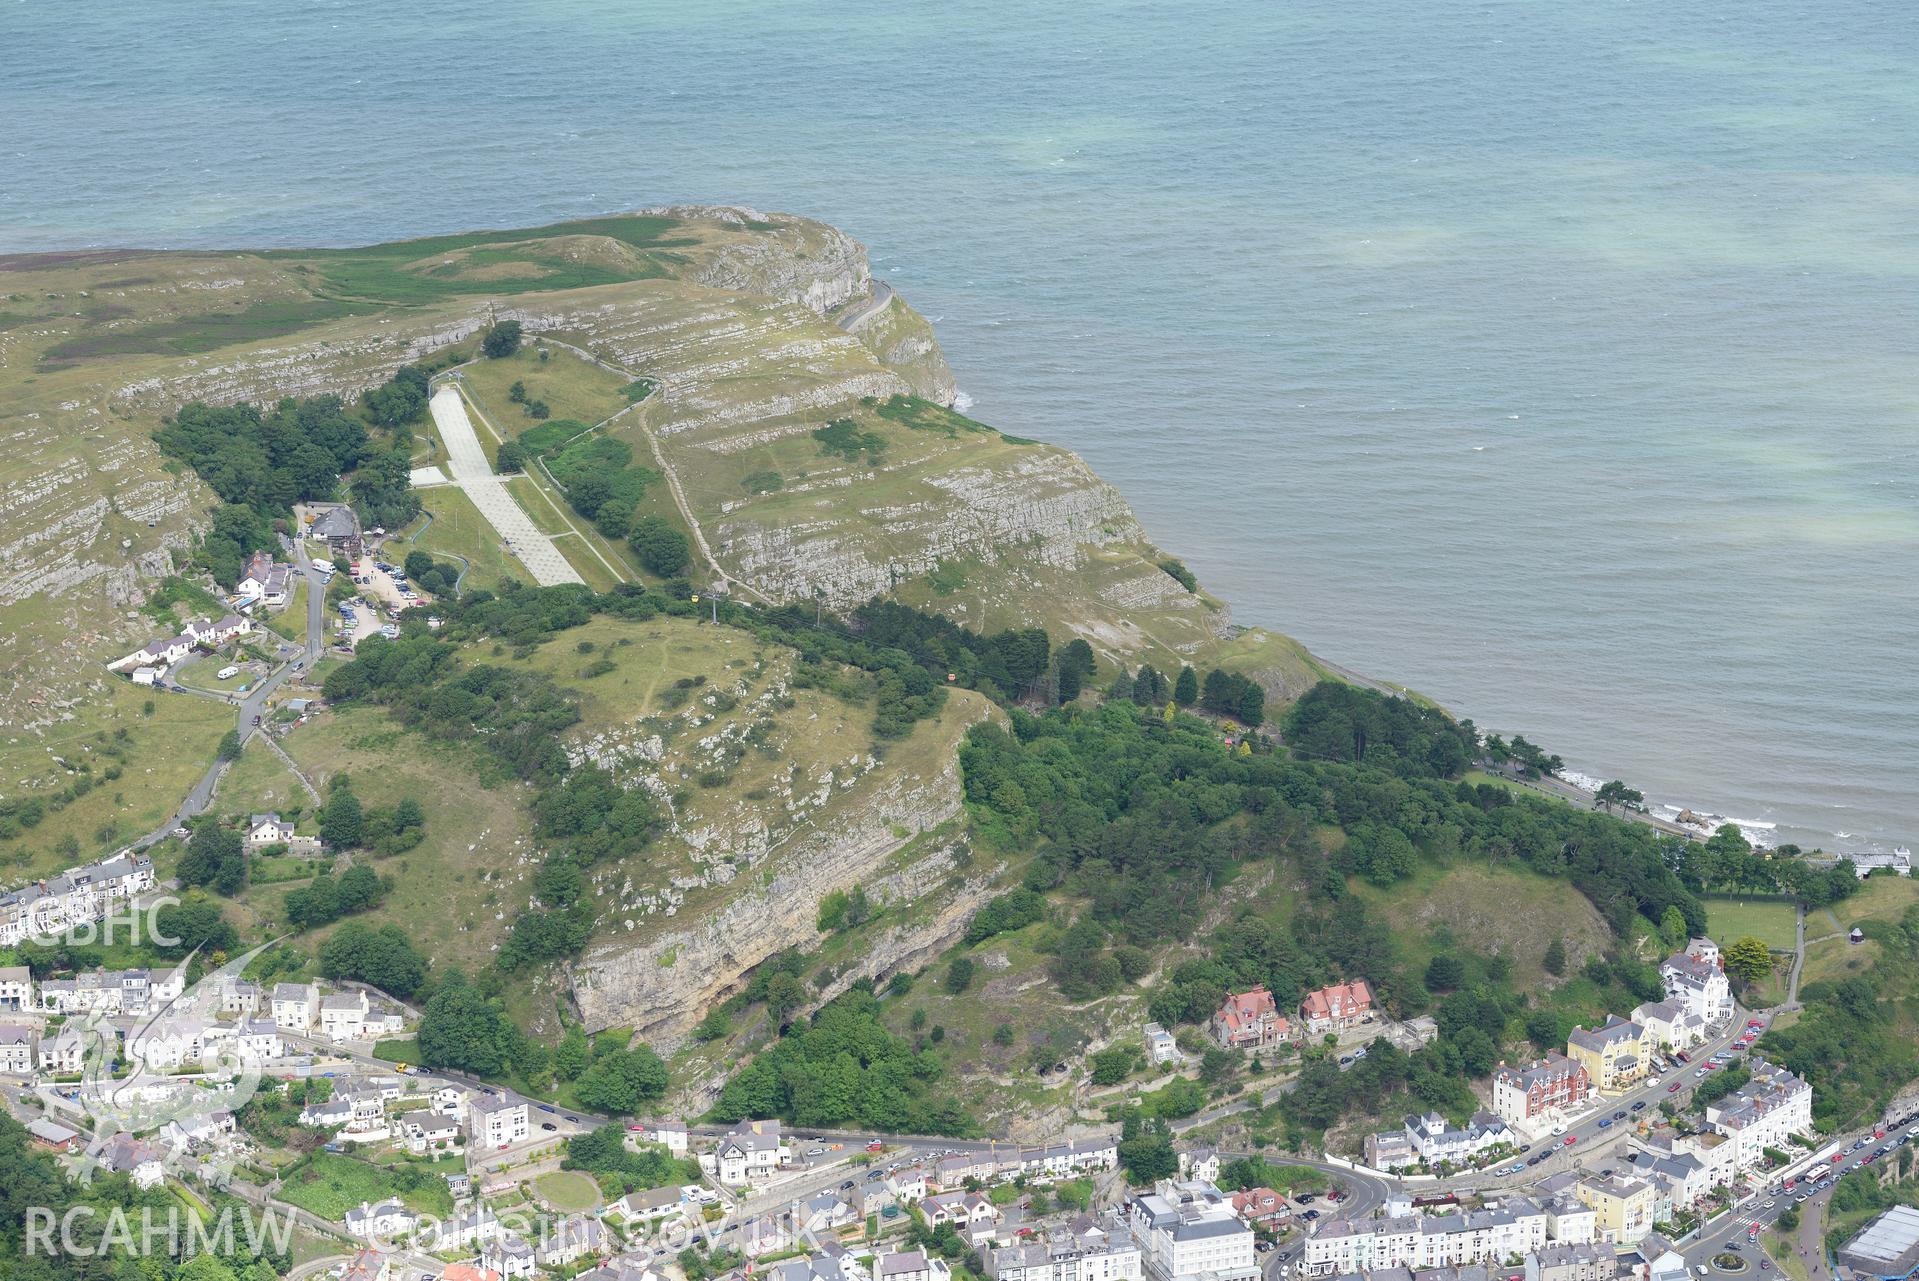 Pen-y-Dinas Hillfort, Belmont Hotel and Grand Hotel, Llandudno. Oblique aerial photograph taken during the Royal Commission's programme of archaeological aerial reconnaissance by Toby Driver on 30th July 2015.